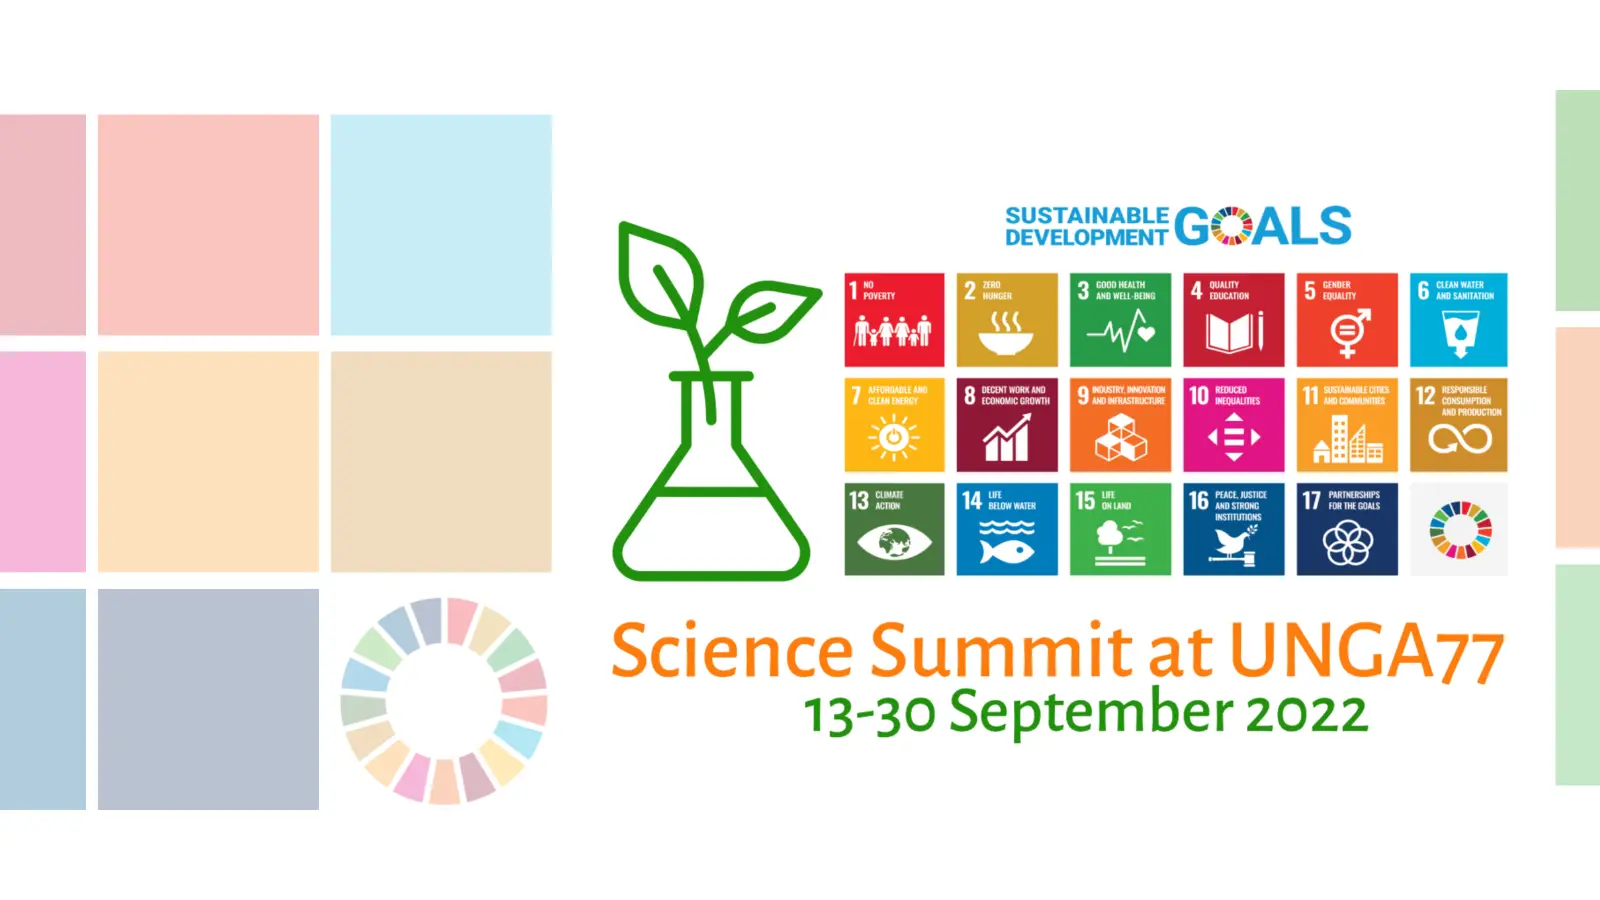 IUCN at the United Nations’ Science Summit 2022